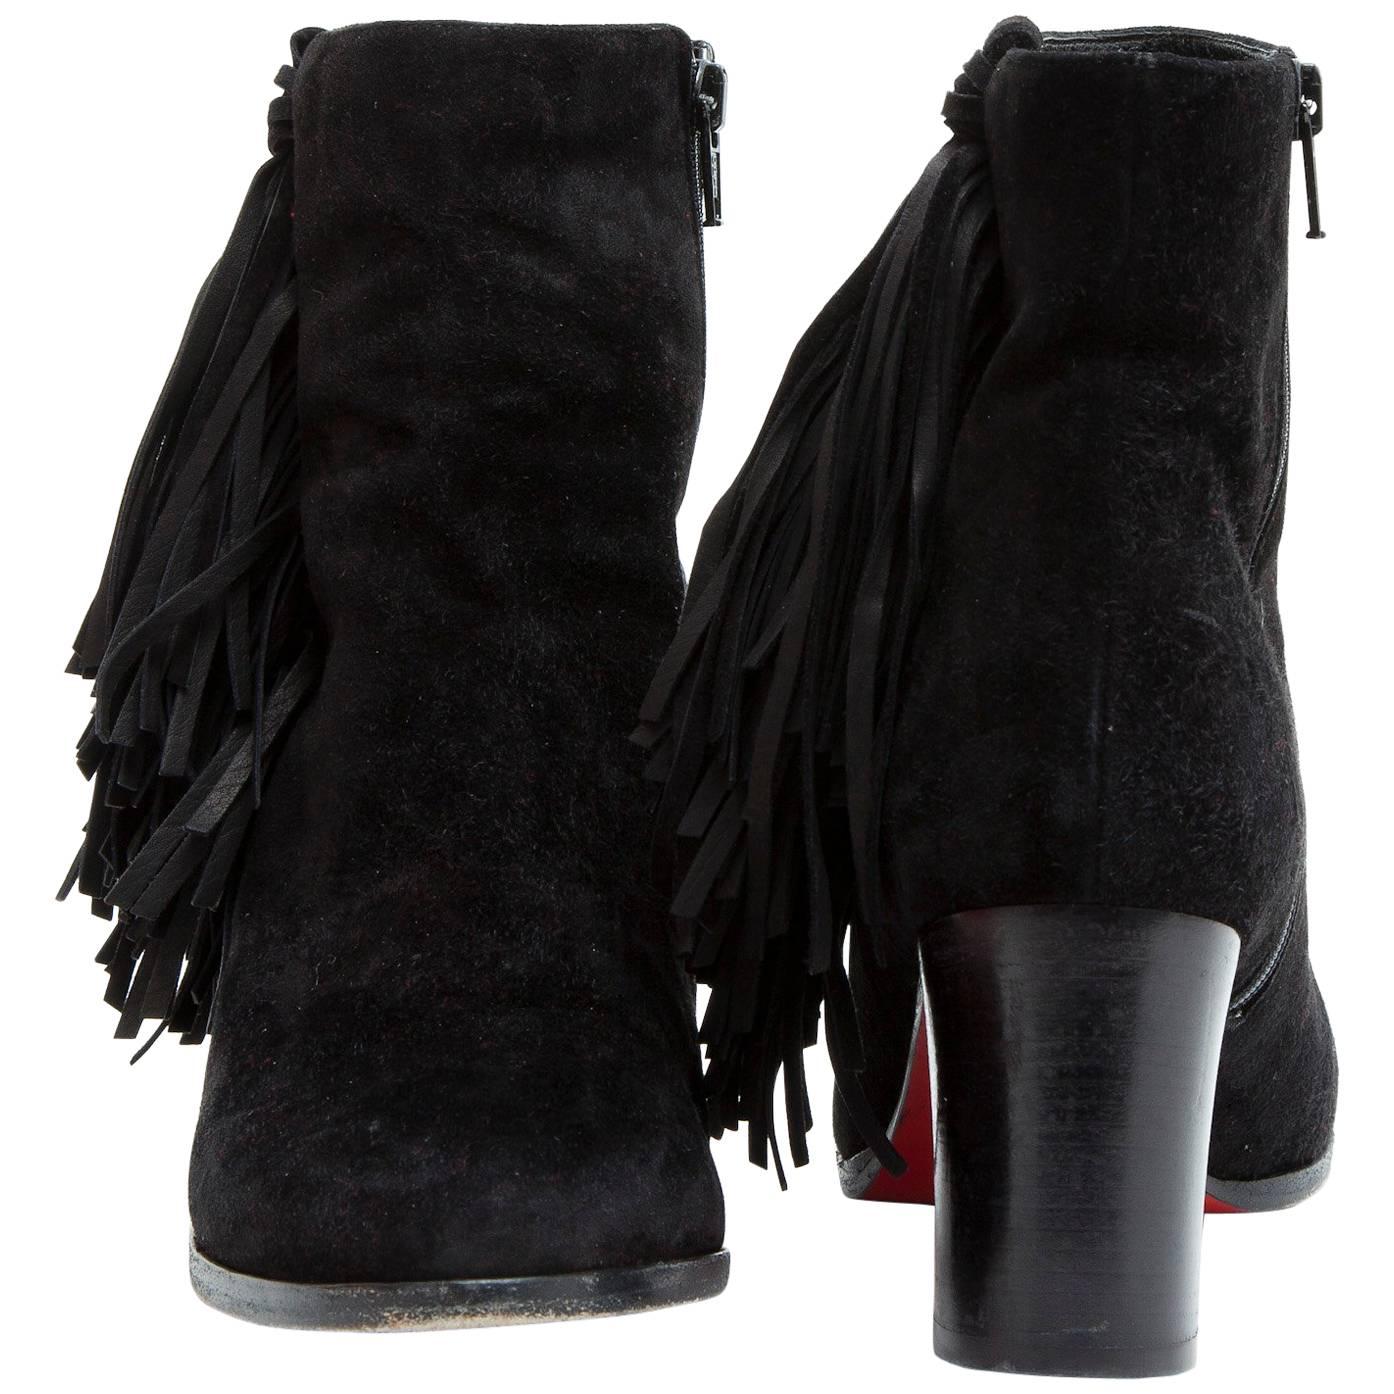 CHRISTIAN LOUBOUTIN Ankle Boots in Black Suede Calfskin Size 39FR